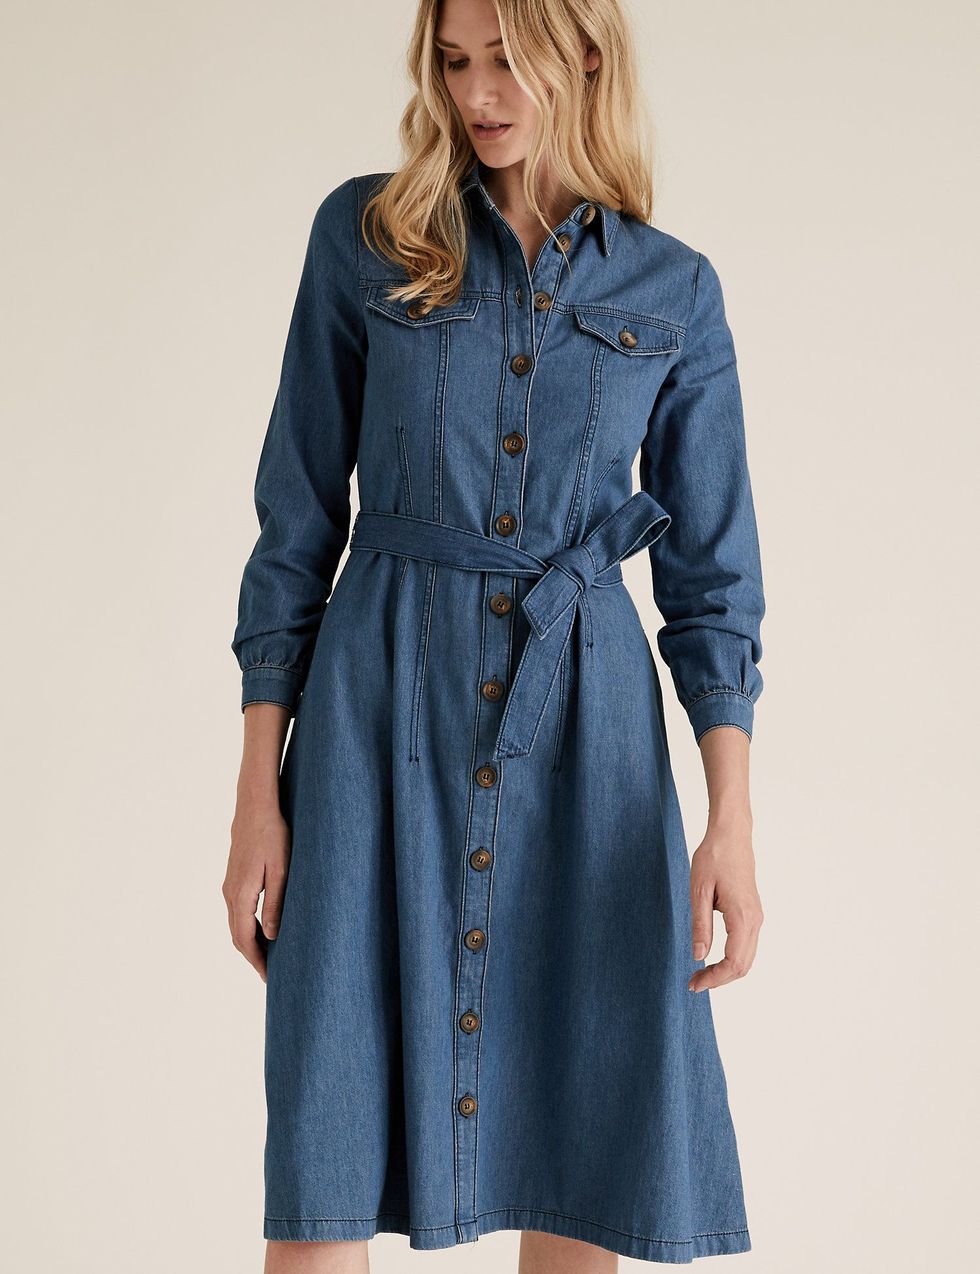 Last year's sell-out denim shirt dress is back at M&S